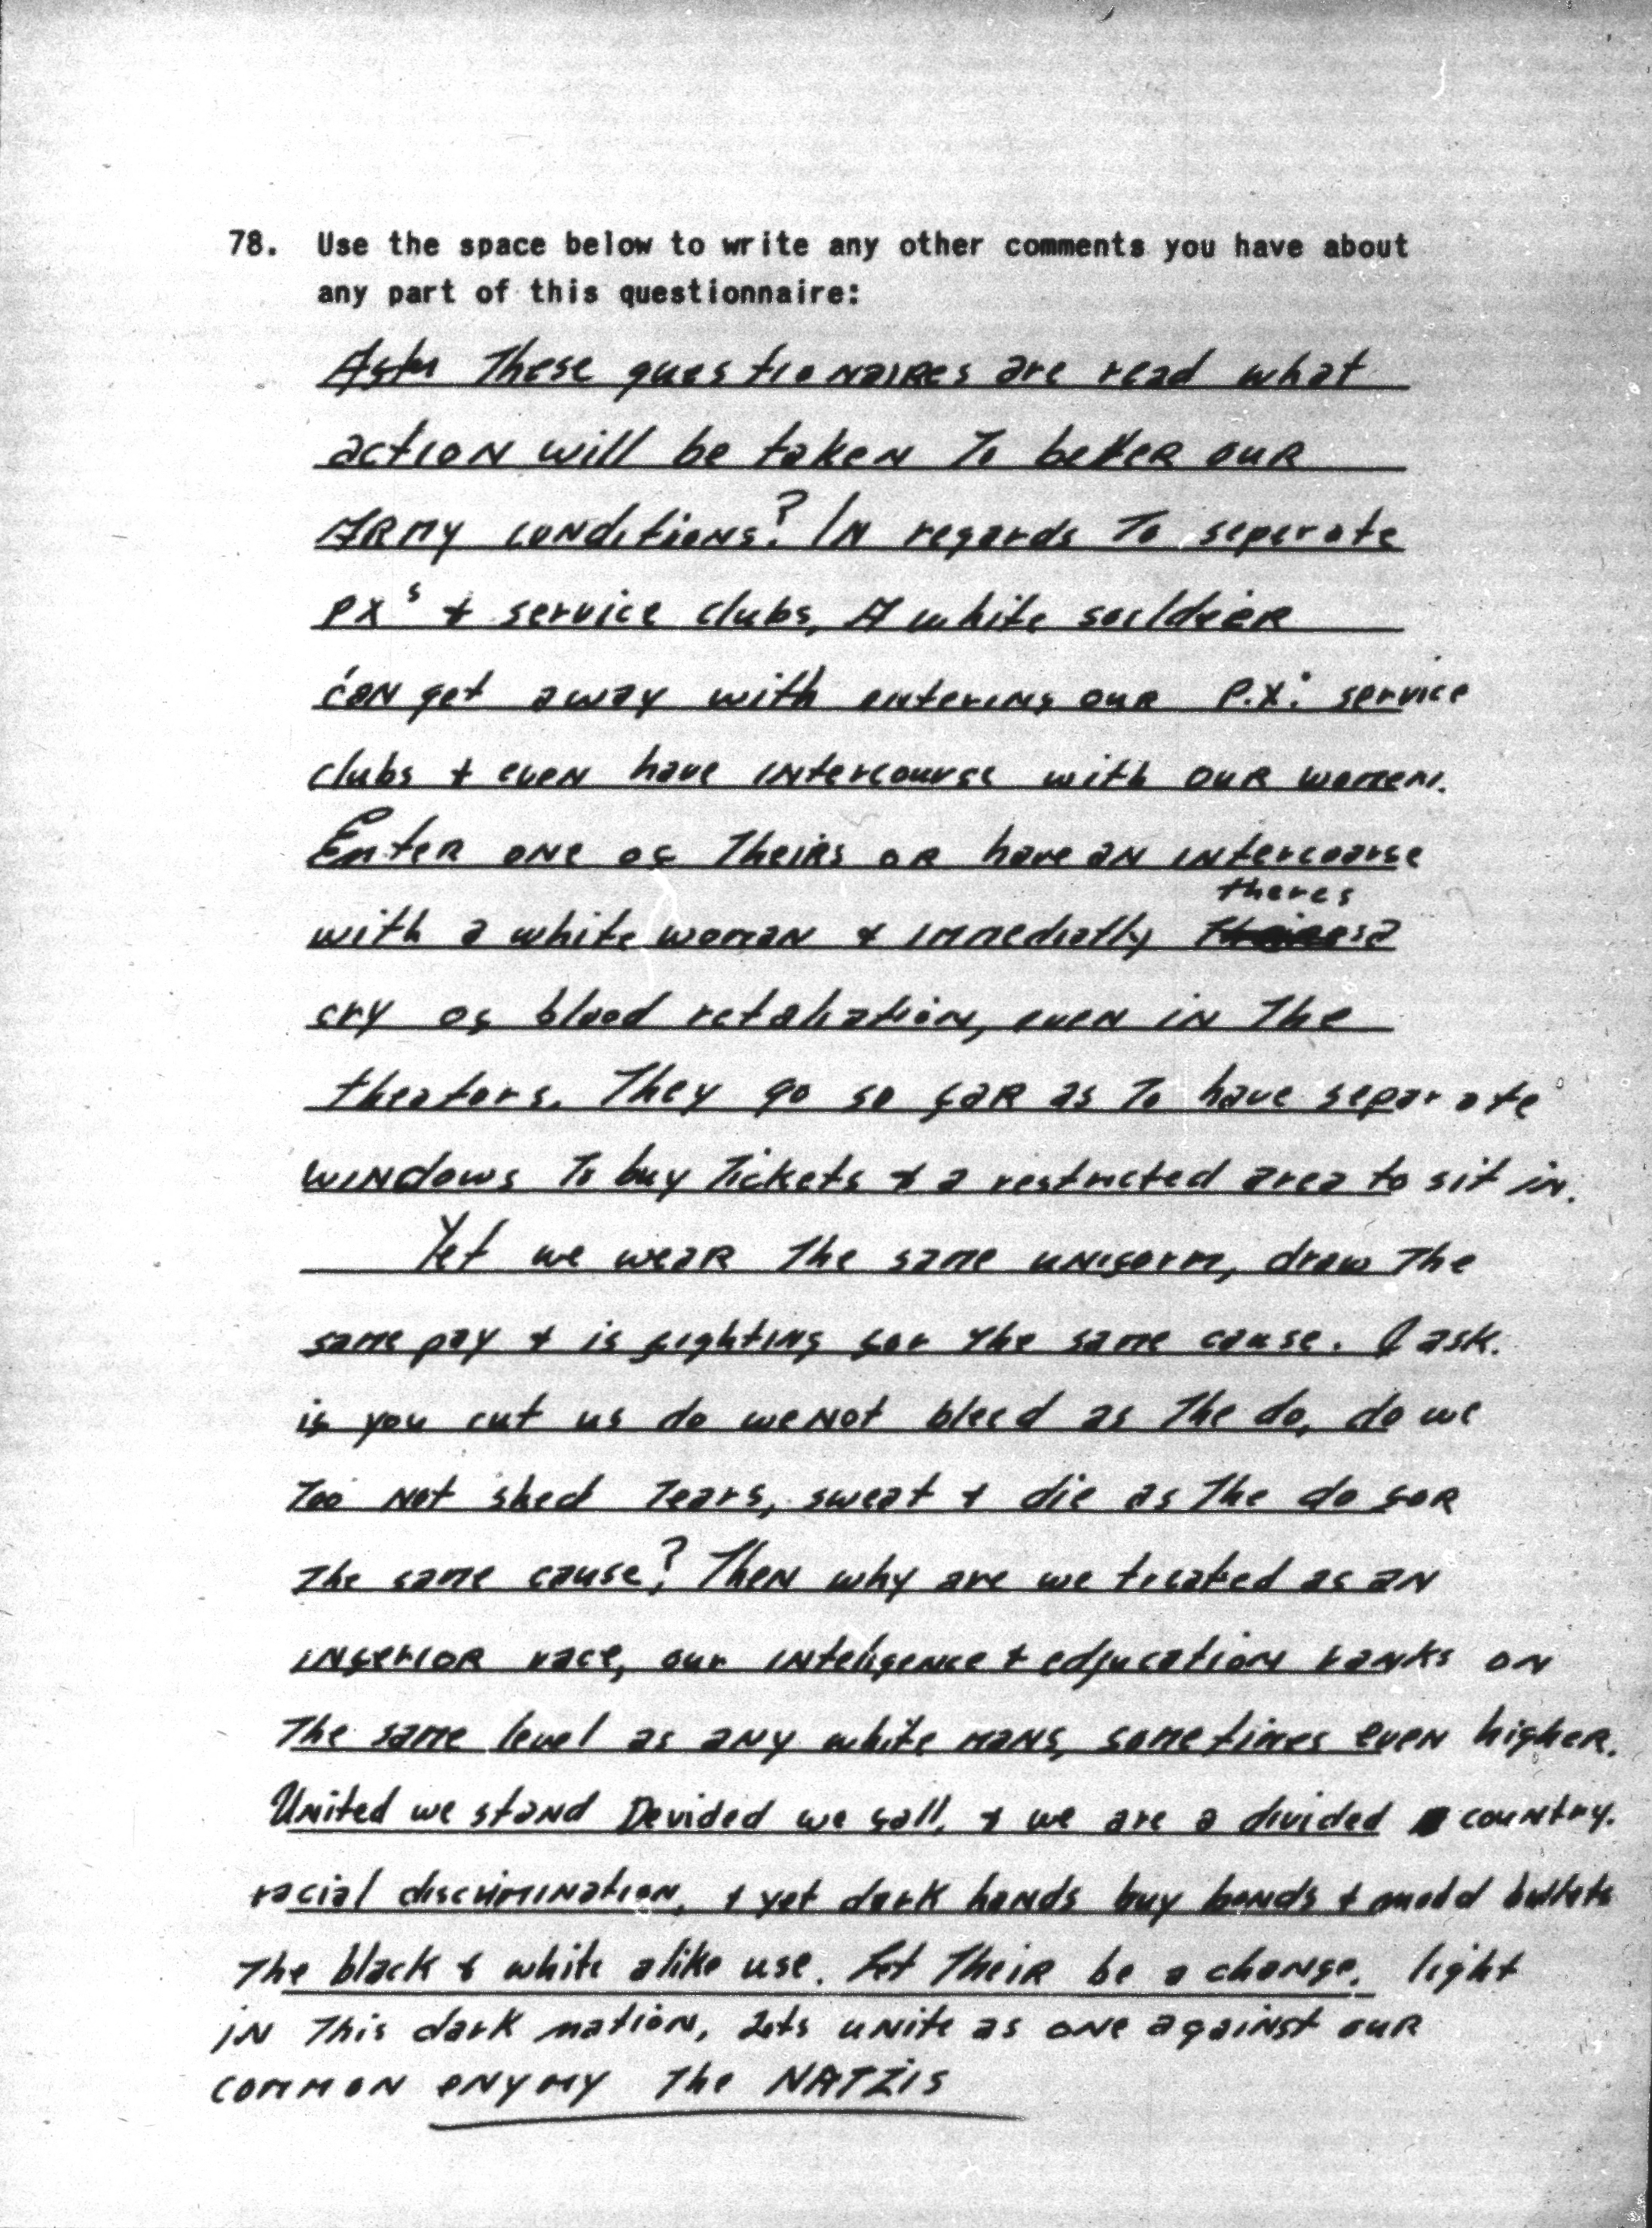 Image of a scanned document. The document contains a handwritten response to S32N survey question 78 which reads "Use the space provided to write any other comments you have about any part of this questionnaire." The response says: "After these questionaires are read what action will be taken to better our army conditions? In regards to seperate PX's [Post Exchanges] & service clubs, a white soldier can get away with entering our P.X.s [Post Exchanges] and service clubs & event have intercourse with our women. Enter one of theirs or have an intercours with a white woman & immediatly their theres is cry of blood retaliation, even in the theaters. They go so far as to have separate windows to buy tickets & a restricted area to sit in. Yet we wear the same uniform, draw the same pay & is fighting for the same cause. I ask if you cut us do we not bleed as the do, do we too not shed tears, sweat & die as the do for the same cause? Then why are we treated as an inferior race, our inteligence & education ranks on the same level as any white mans, sometimes even higher. United we stand Devided we fall, & we are a divided  country. racial discrimination & yet dark hands buy bonds & mold bullets the black and white alike use. let their be a change, light in this dark nation. lets unite as one against our common enymy [enemy] the NATZIS.”